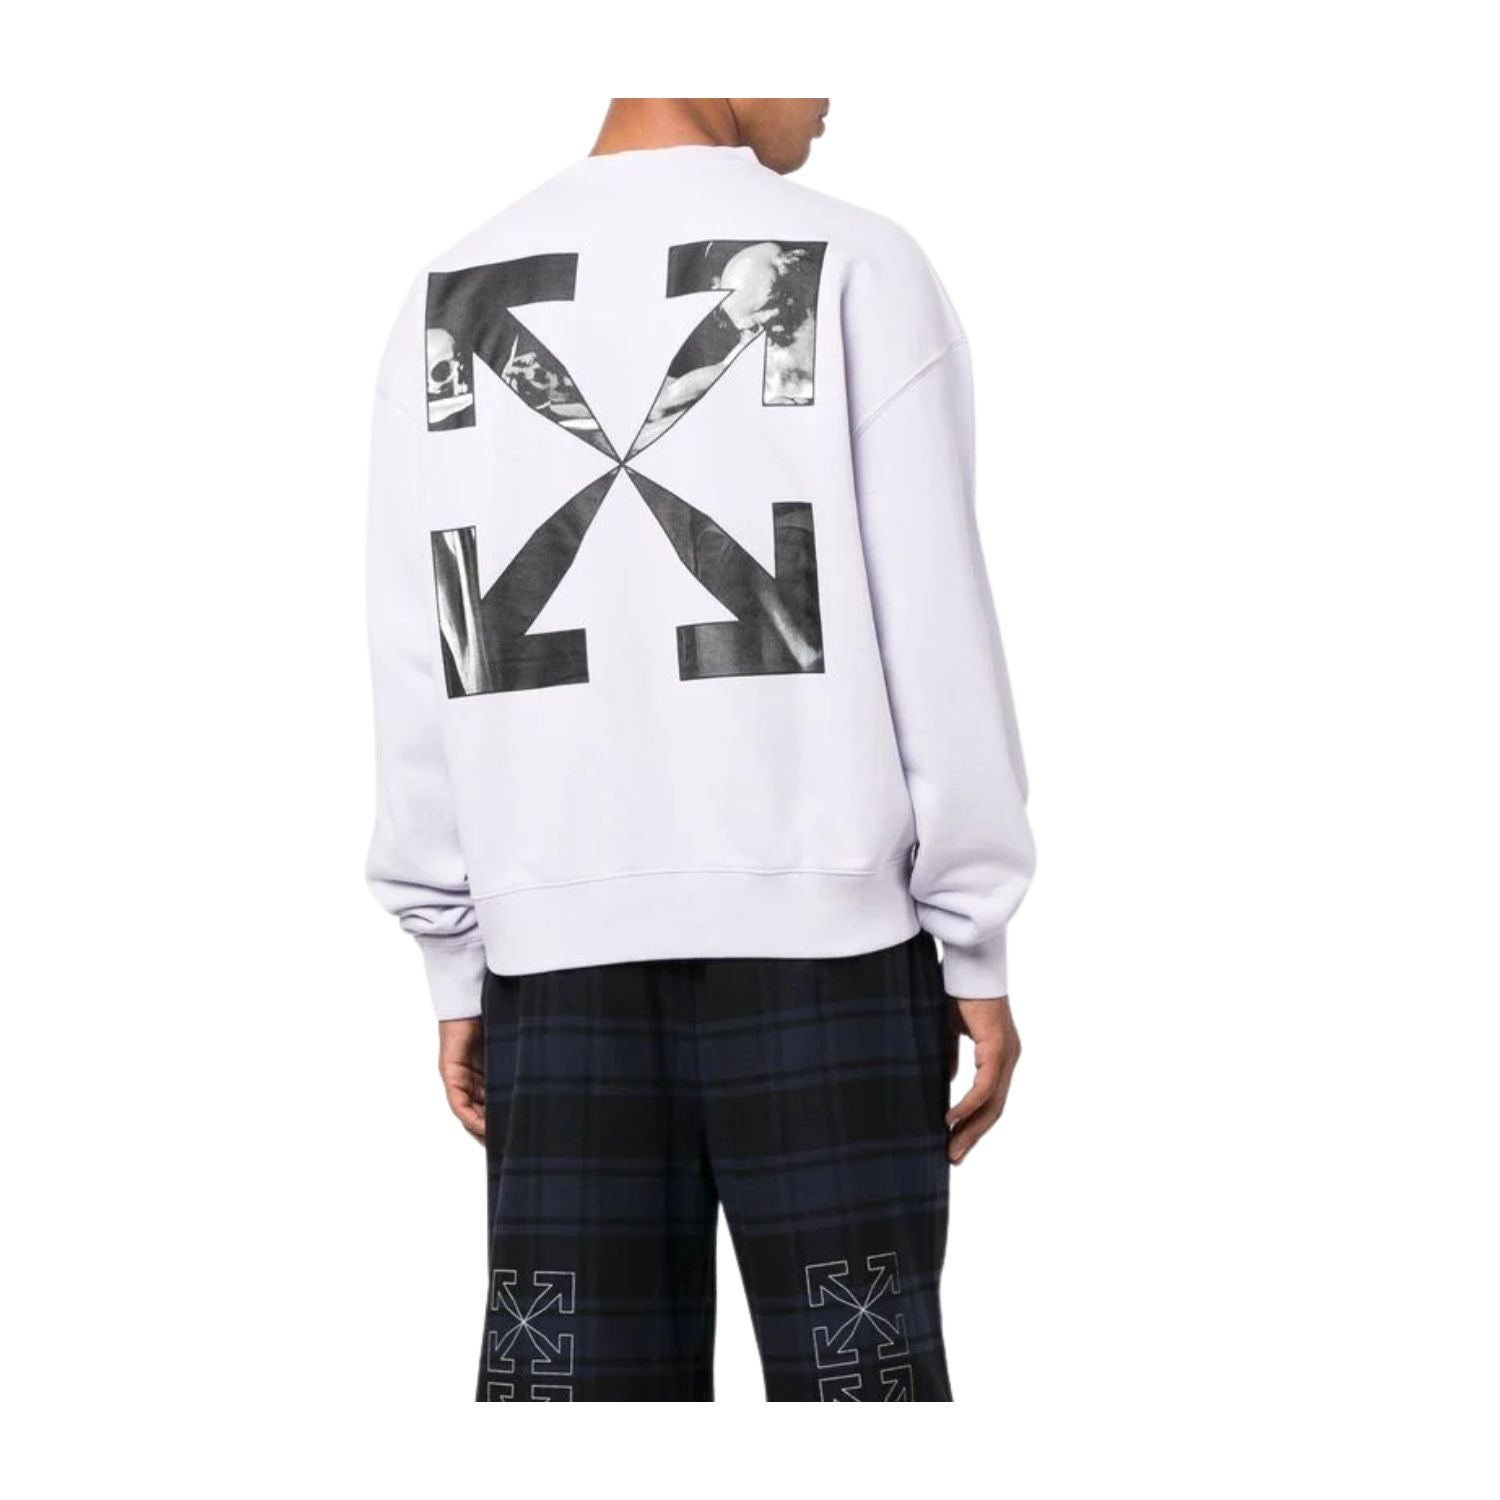 Off-white Caravag Arrow Over Crewneck Mens Style : Omba058f22fle00